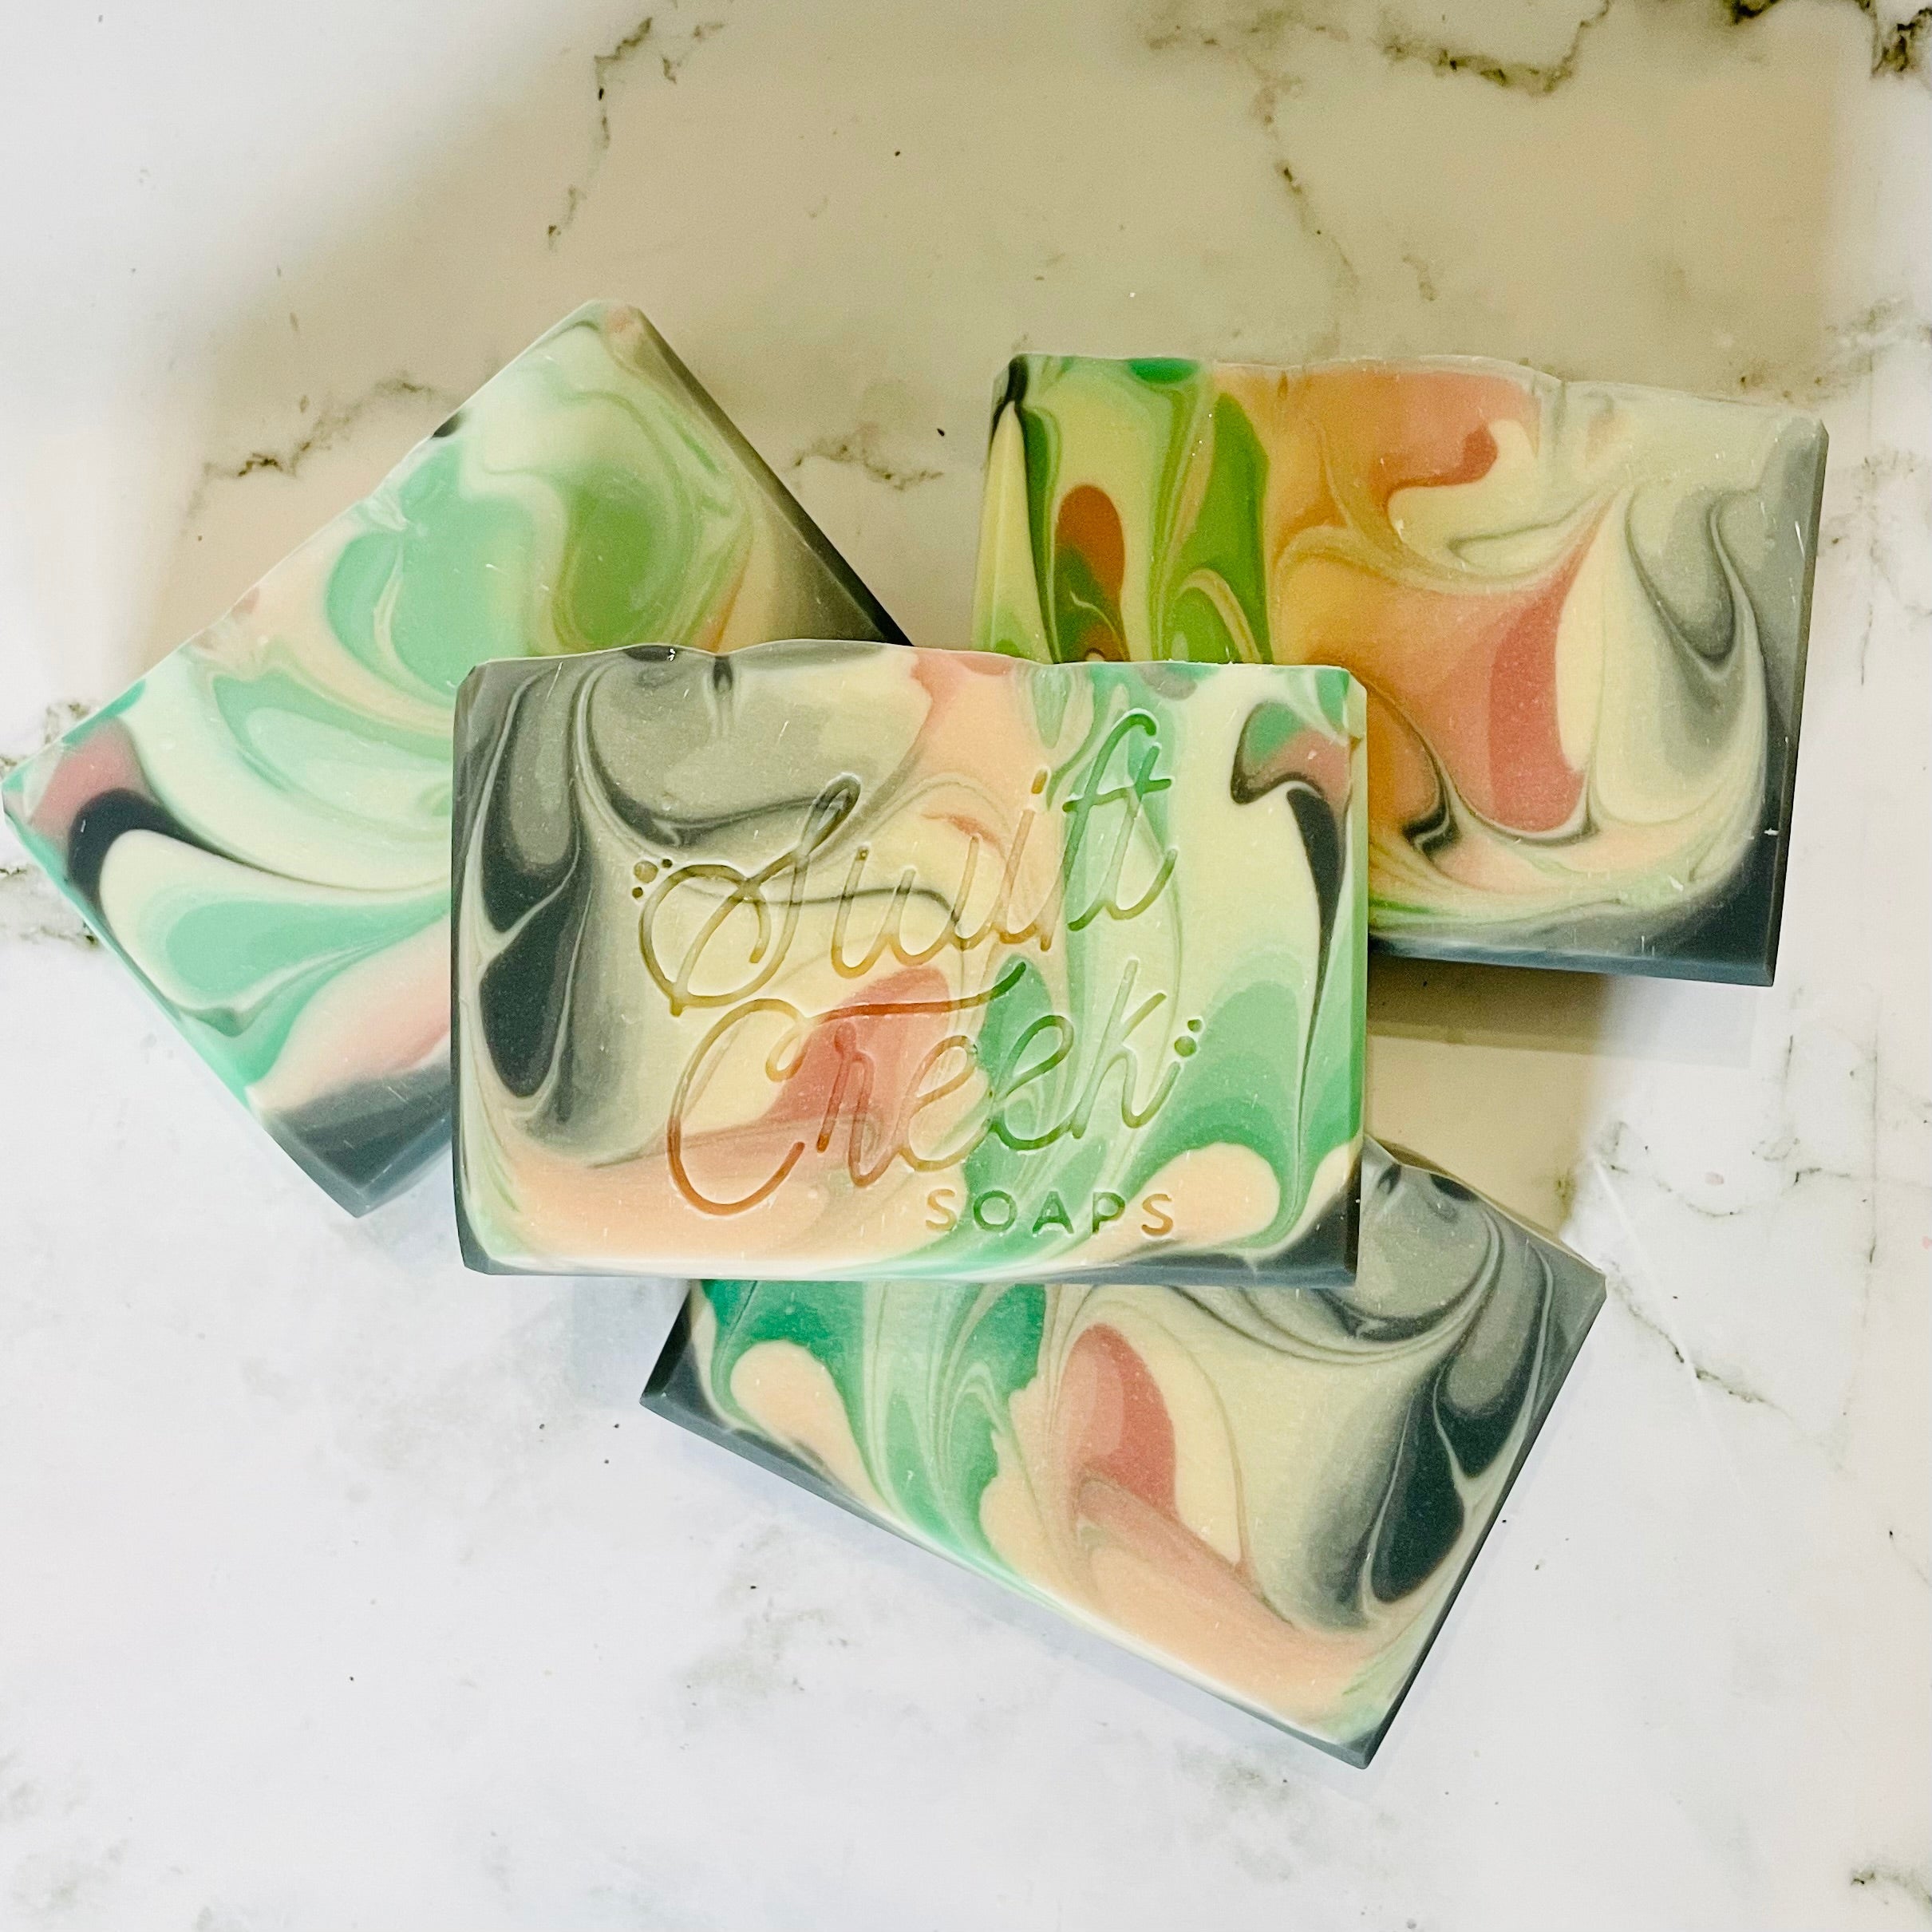 Afternoon Tea soap